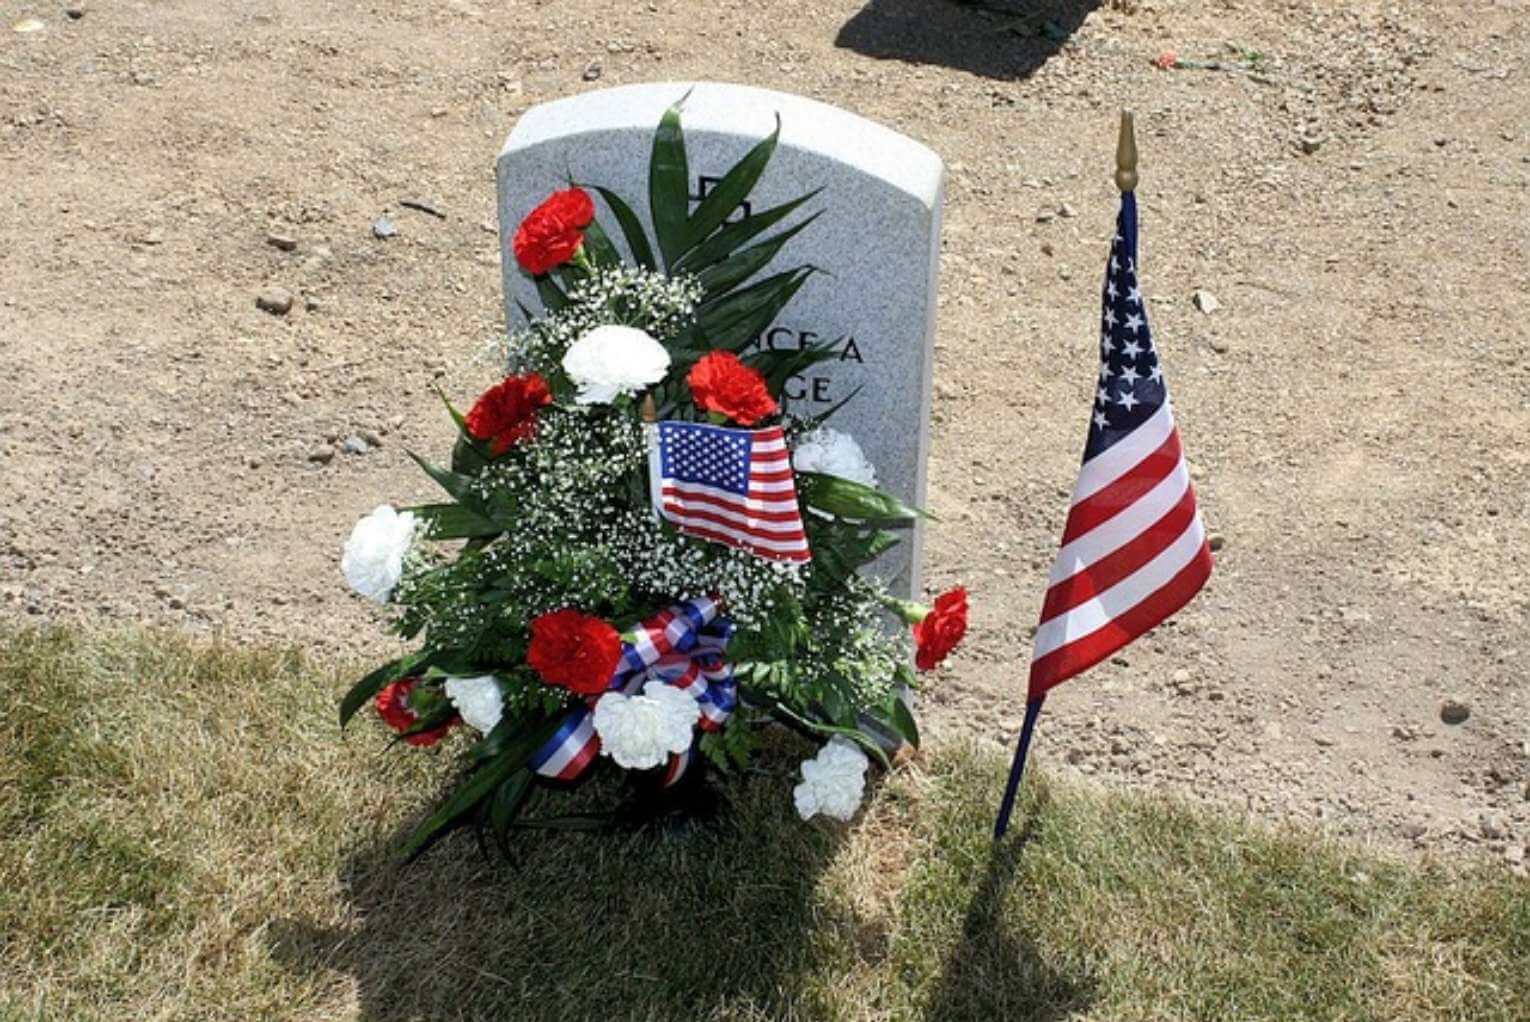 What Can We Learn From Memorial Day?